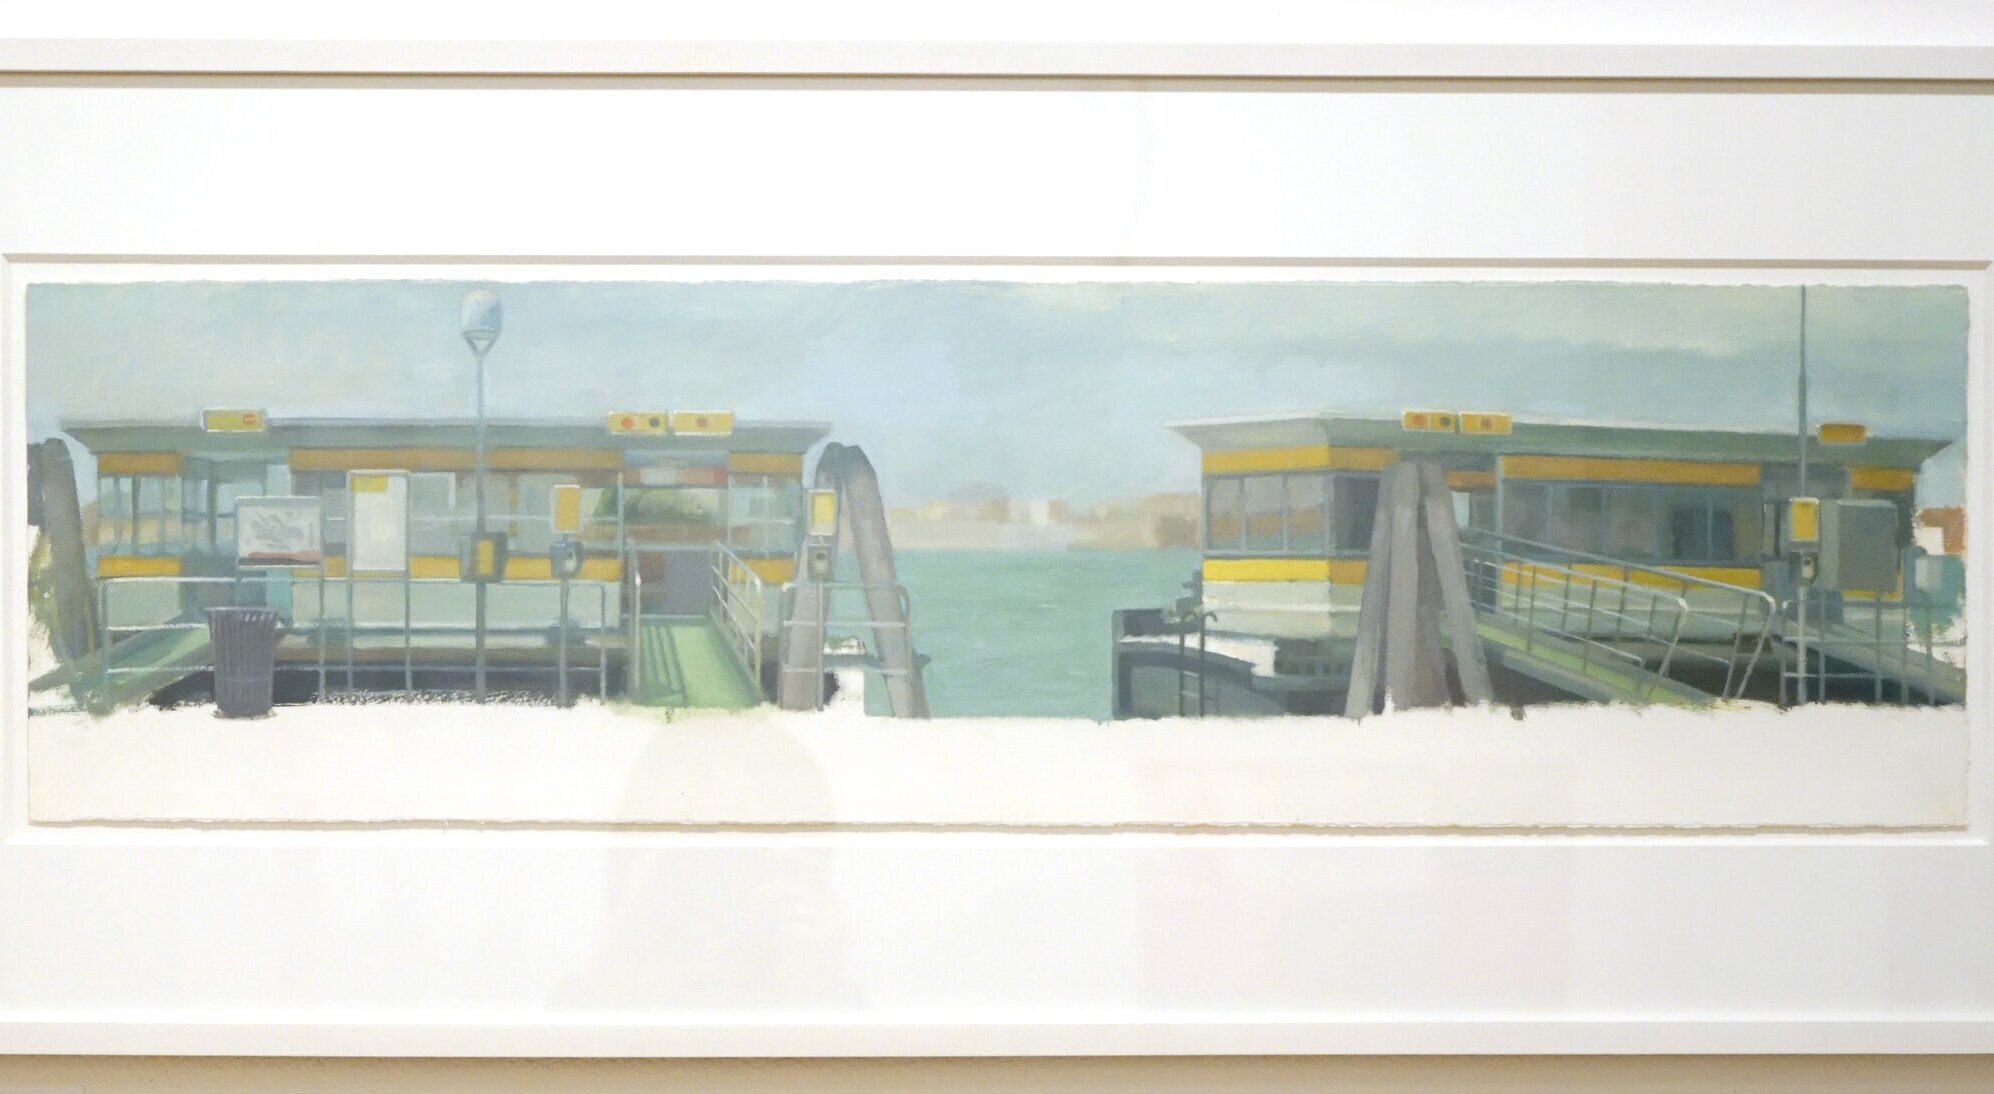  Chris Wright (PiV Faculty, ‘10–’14, ‘16),  Zitelle , 2011–12. Oil on paper, 8.5 x 30 in. 